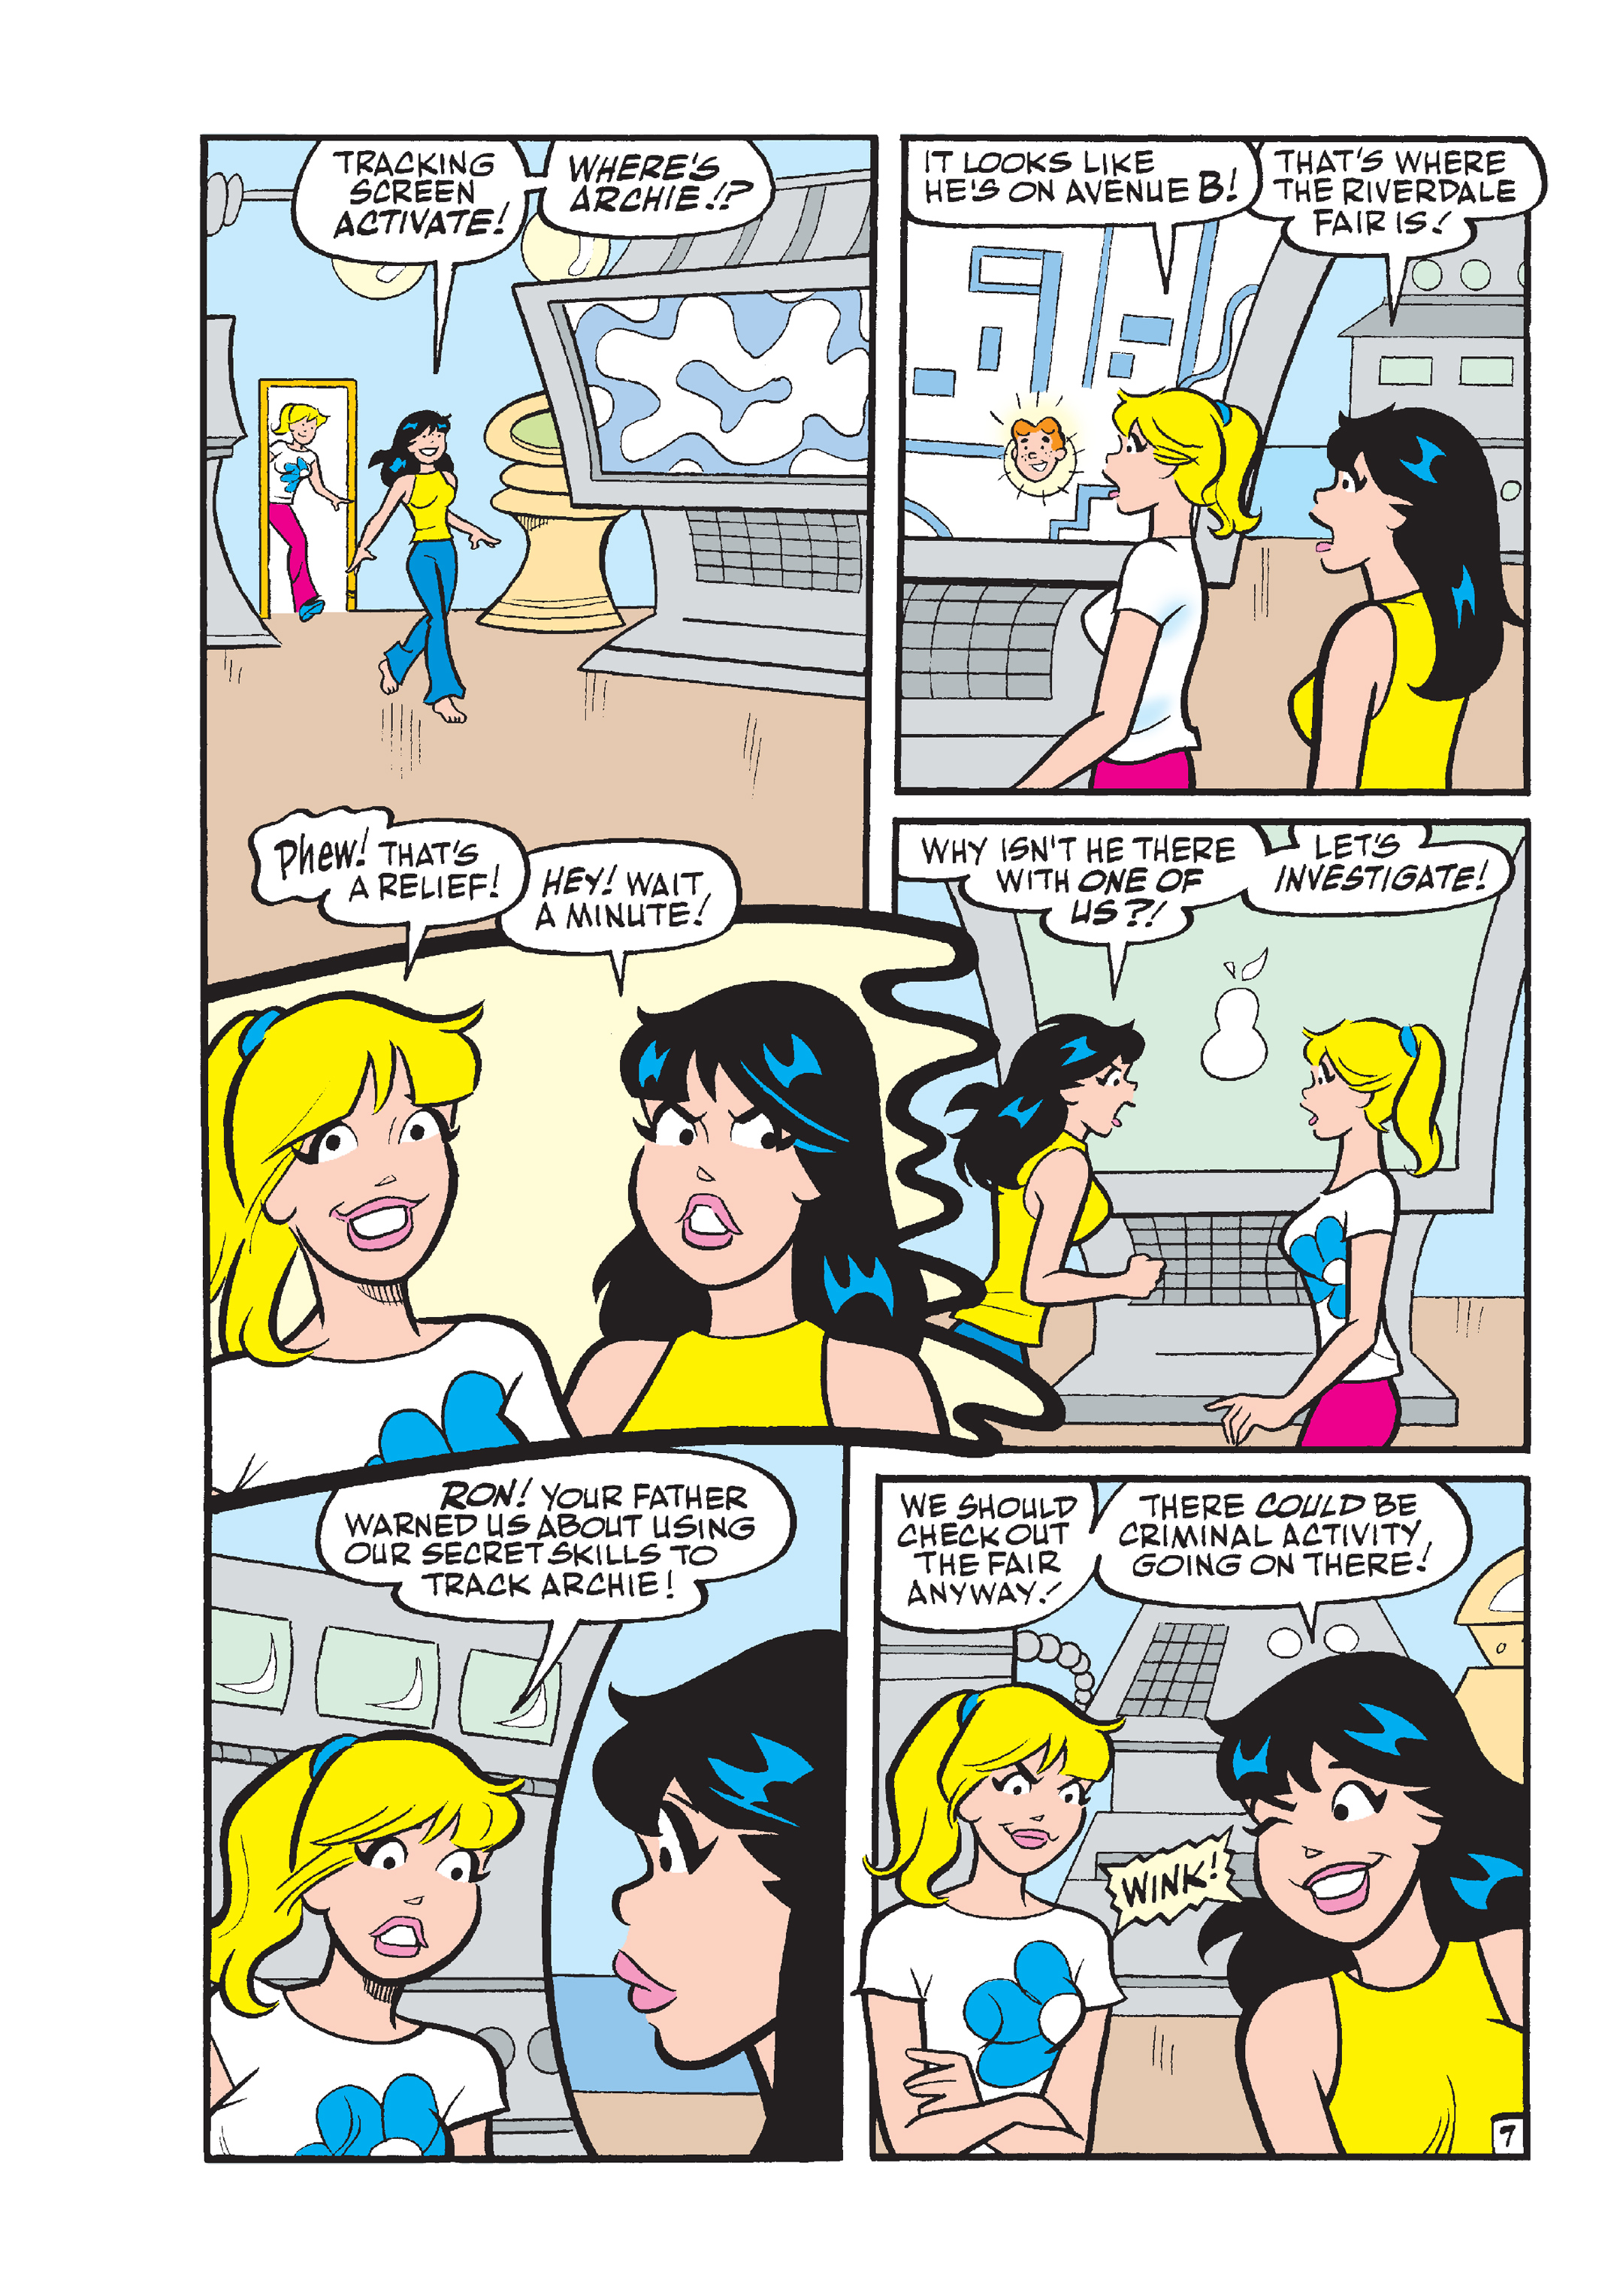 Betty Archie Comics Porn Mom Lesbian - The Best Of Archie Comics Betty Veronica Tpb 2 Part 4 | Read The Best Of Archie  Comics Betty Veronica Tpb 2 Part 4 comic online in high quality. Read Full  Comic